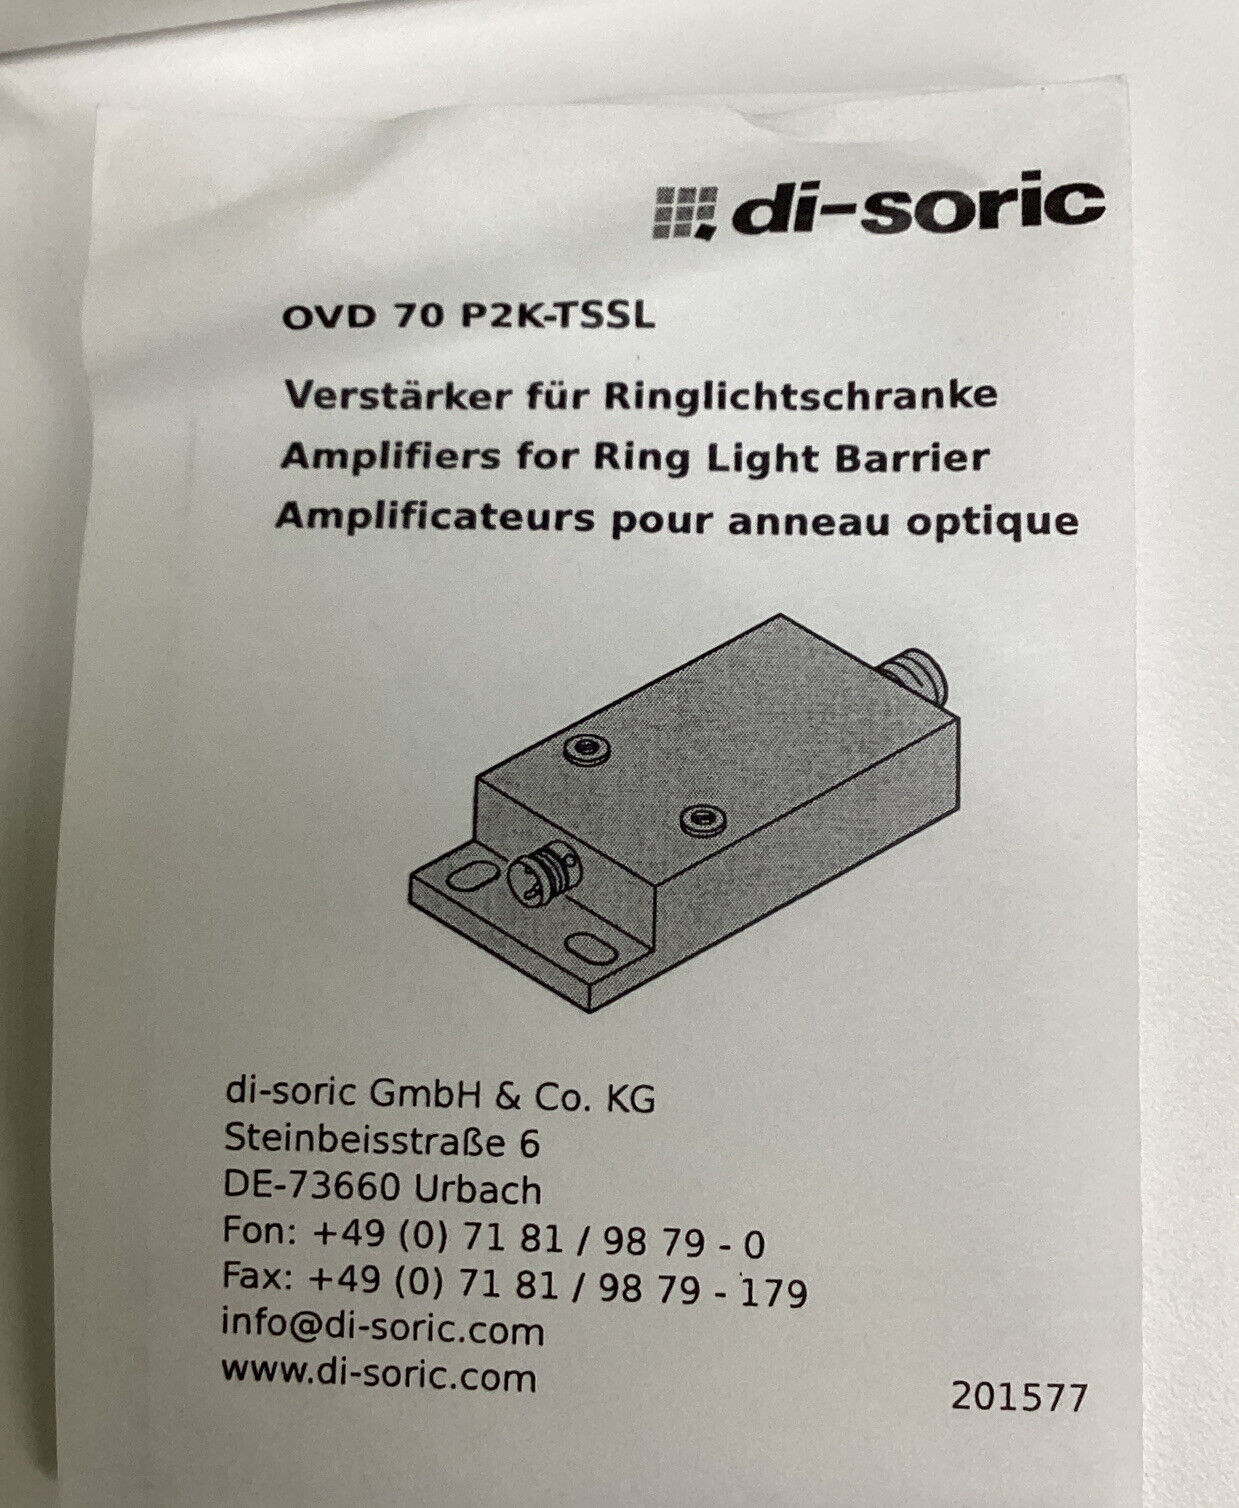 Di-Soric OVD 70 P2K-TSSL / 201577 Amplifier for Ring Light Barrier (CL284)